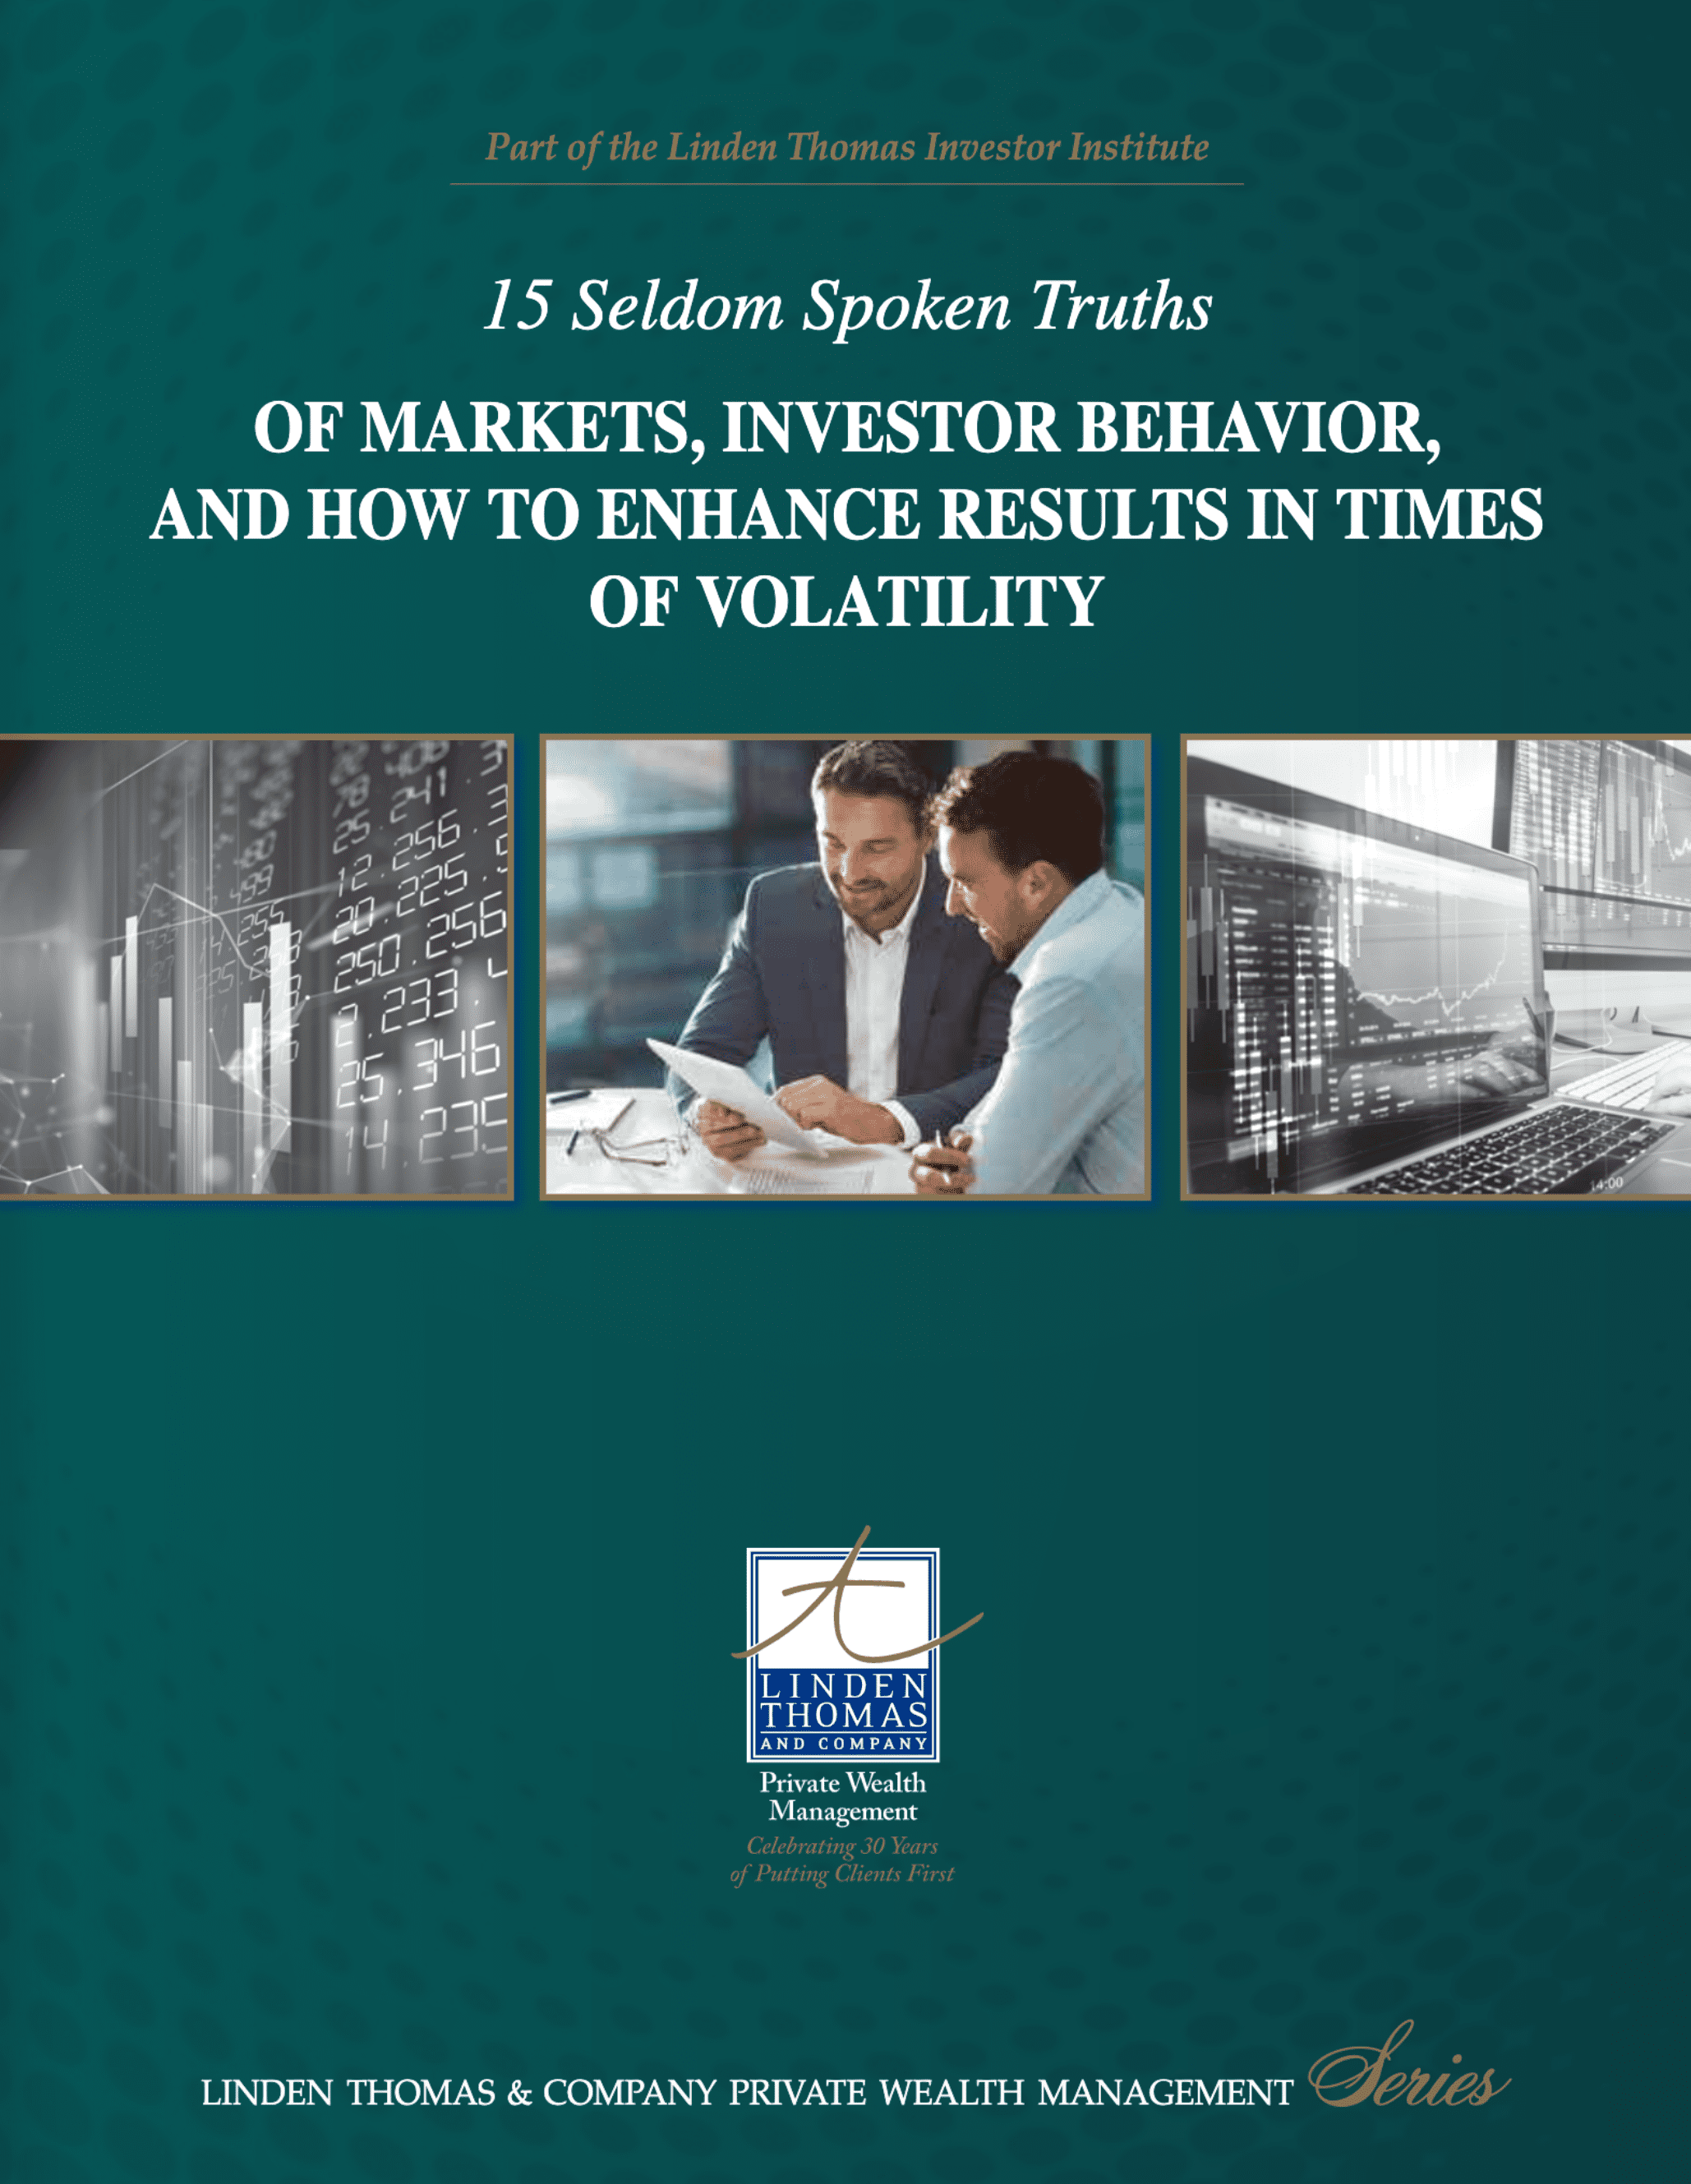 15 Seldom Spoken Truths Of Markets, Investor Behavior, and How to Enhance Results in Times of Volatility